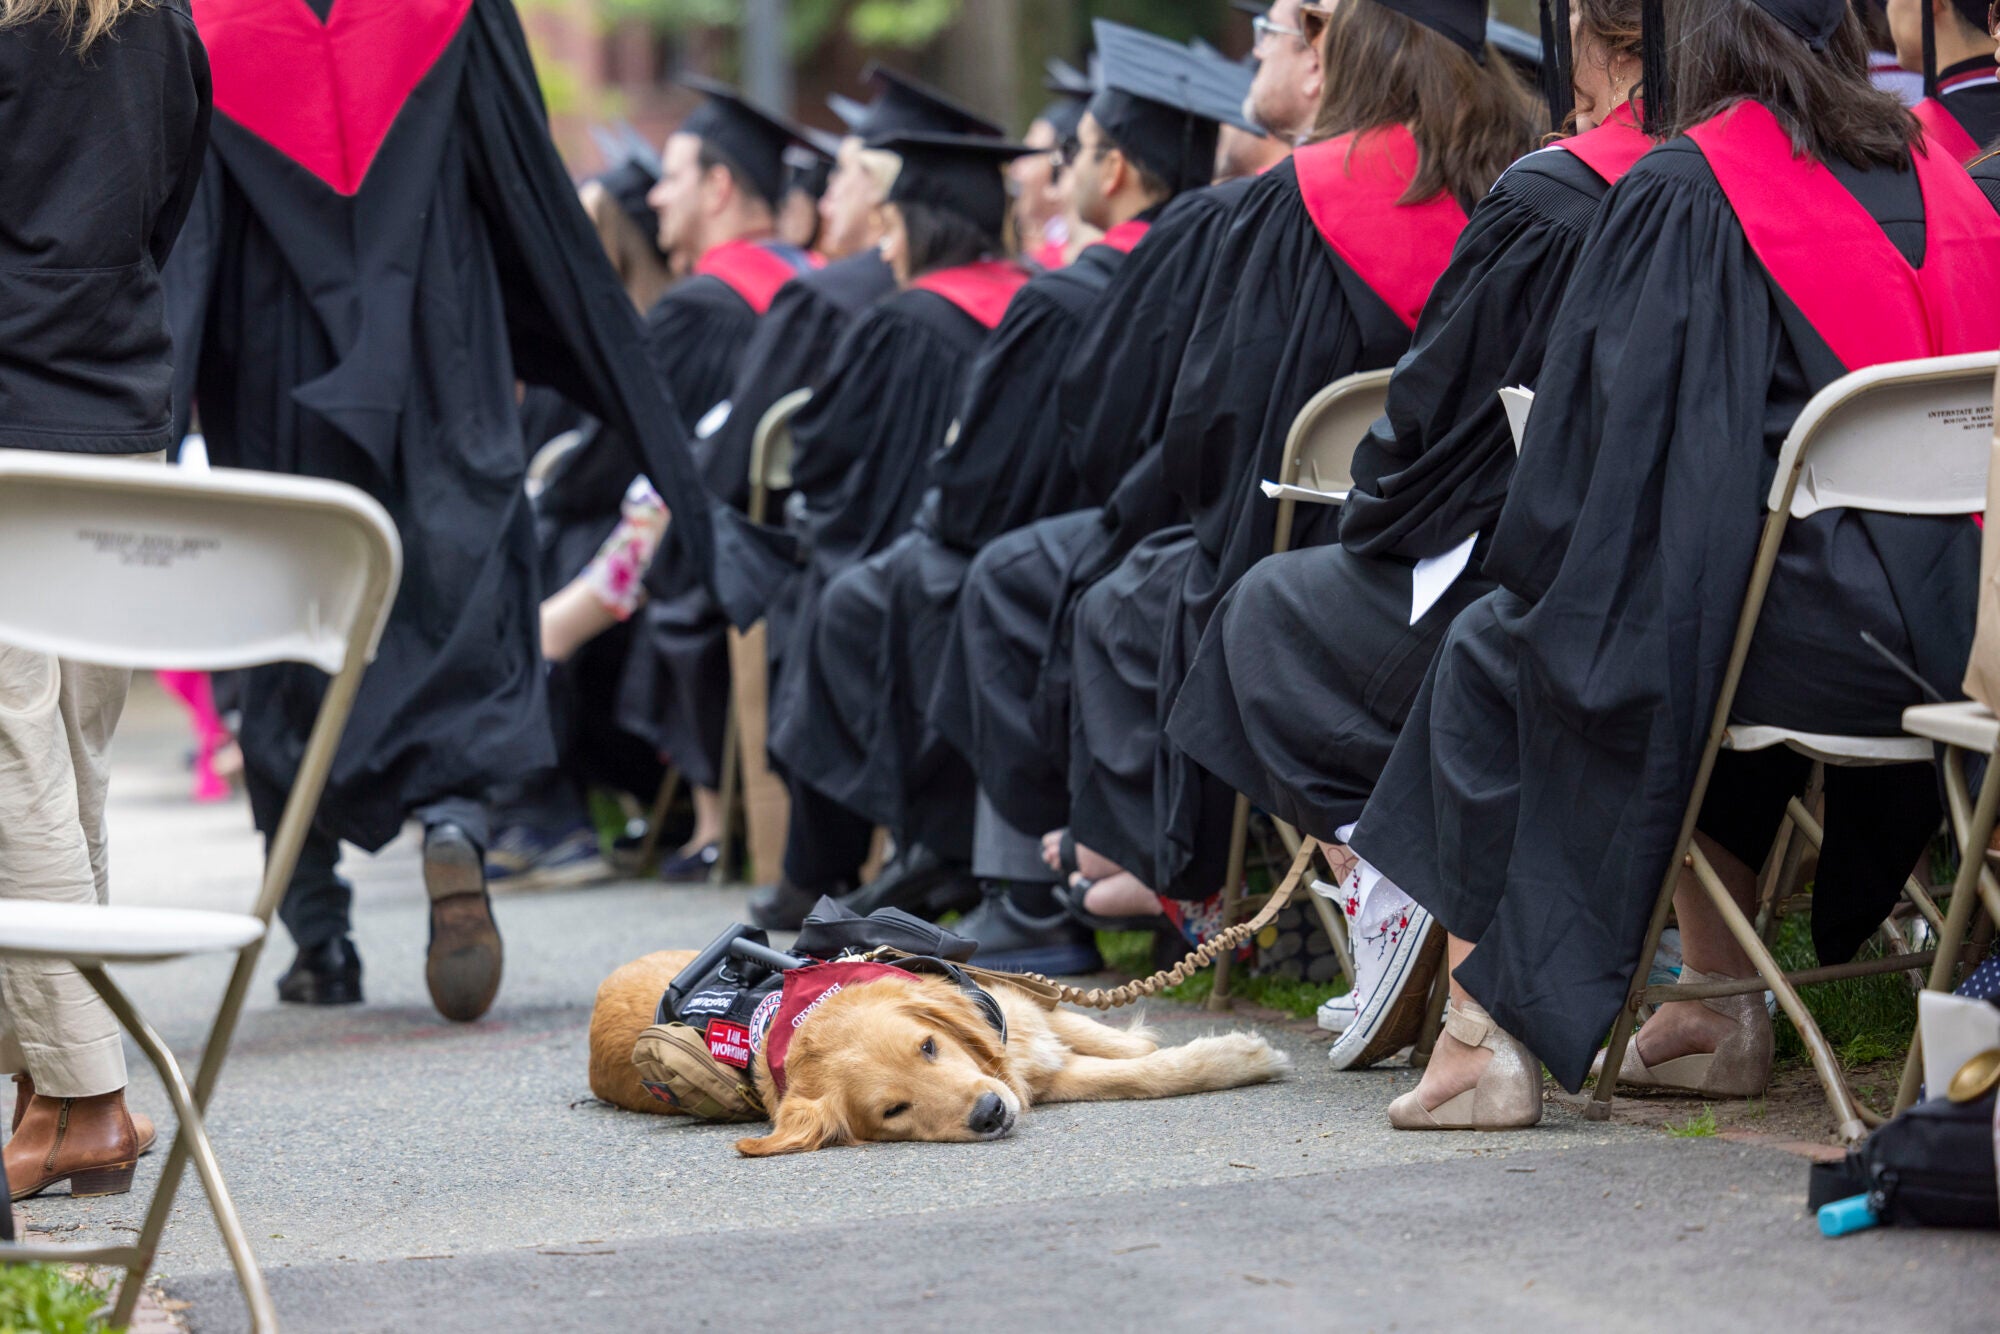 A service dog laying down during Commencement